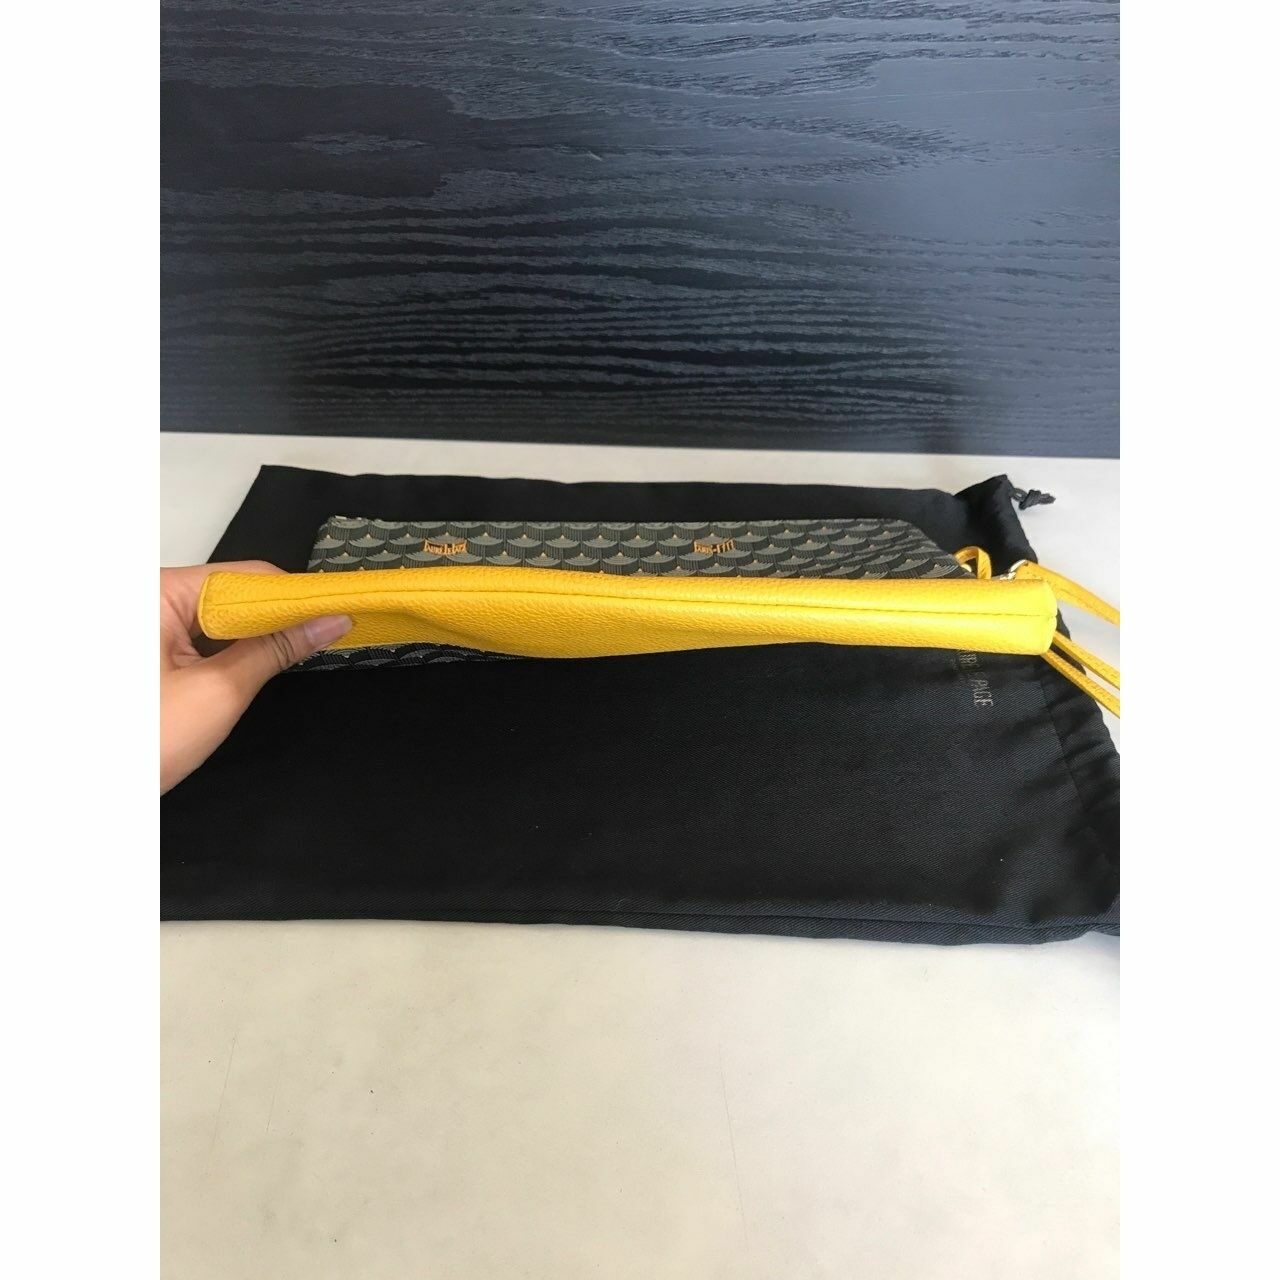 Faure Le Page Grey & Yellow Clutch